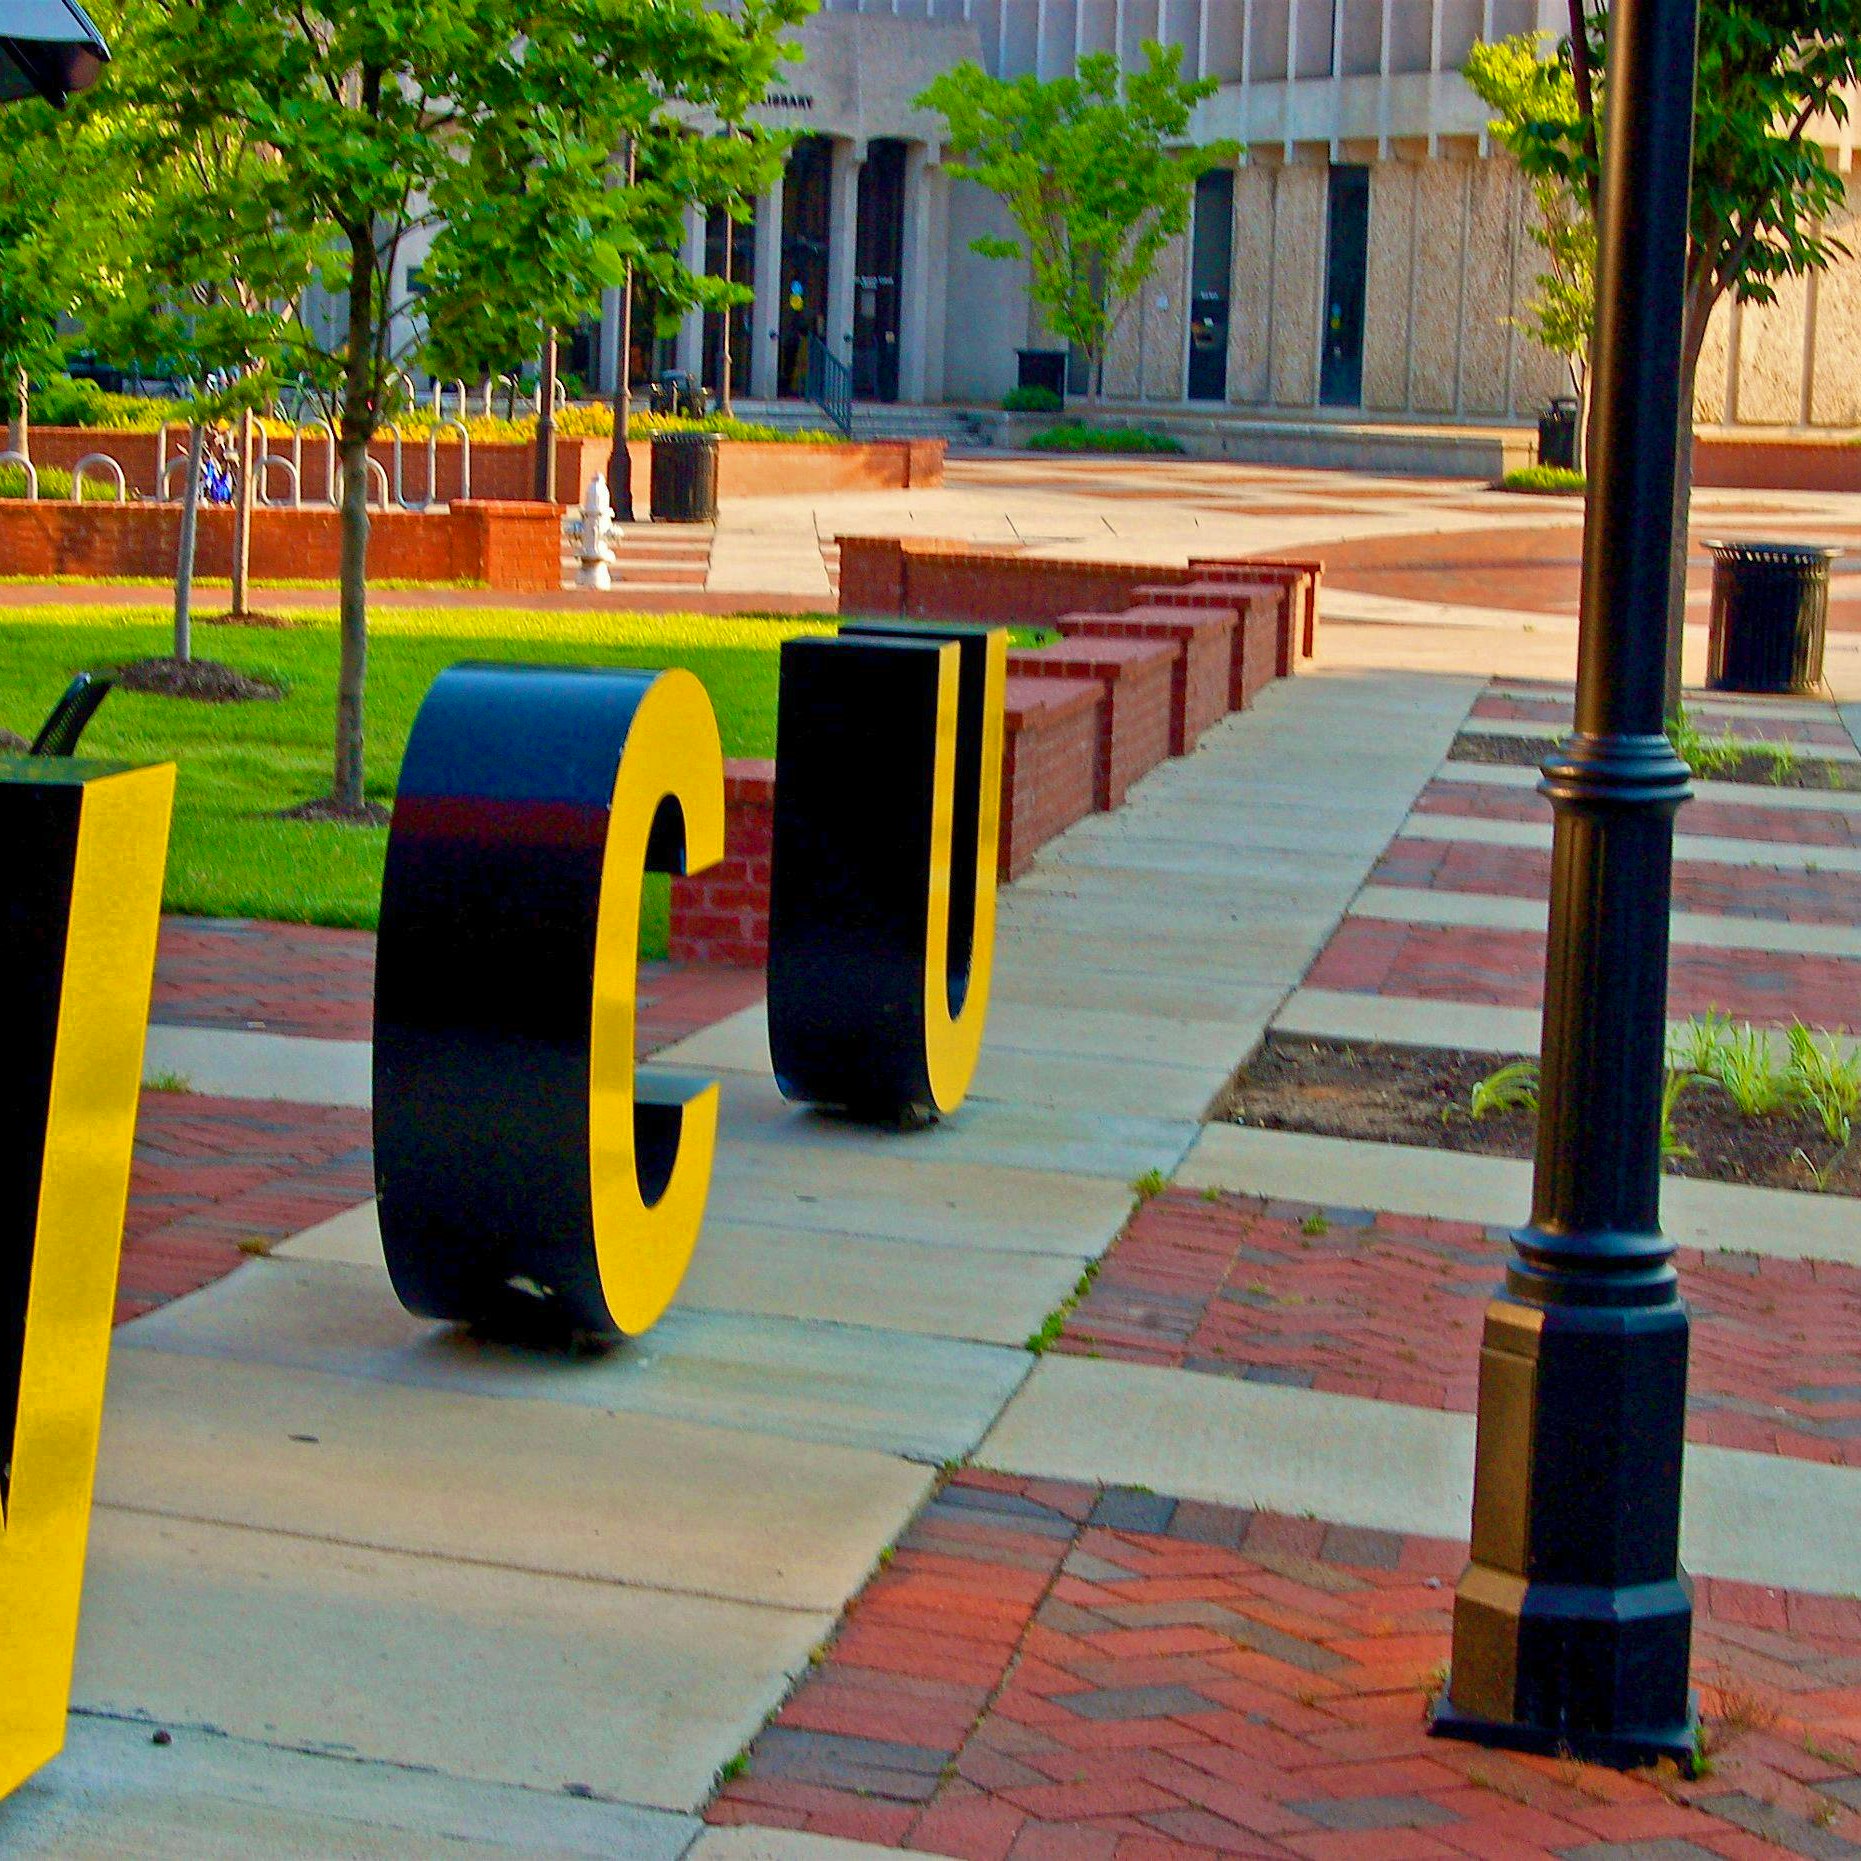 Virginia Commonwealth University - Net Price, Tuition, Cost to Attend,  Financial Aid and Student Loans